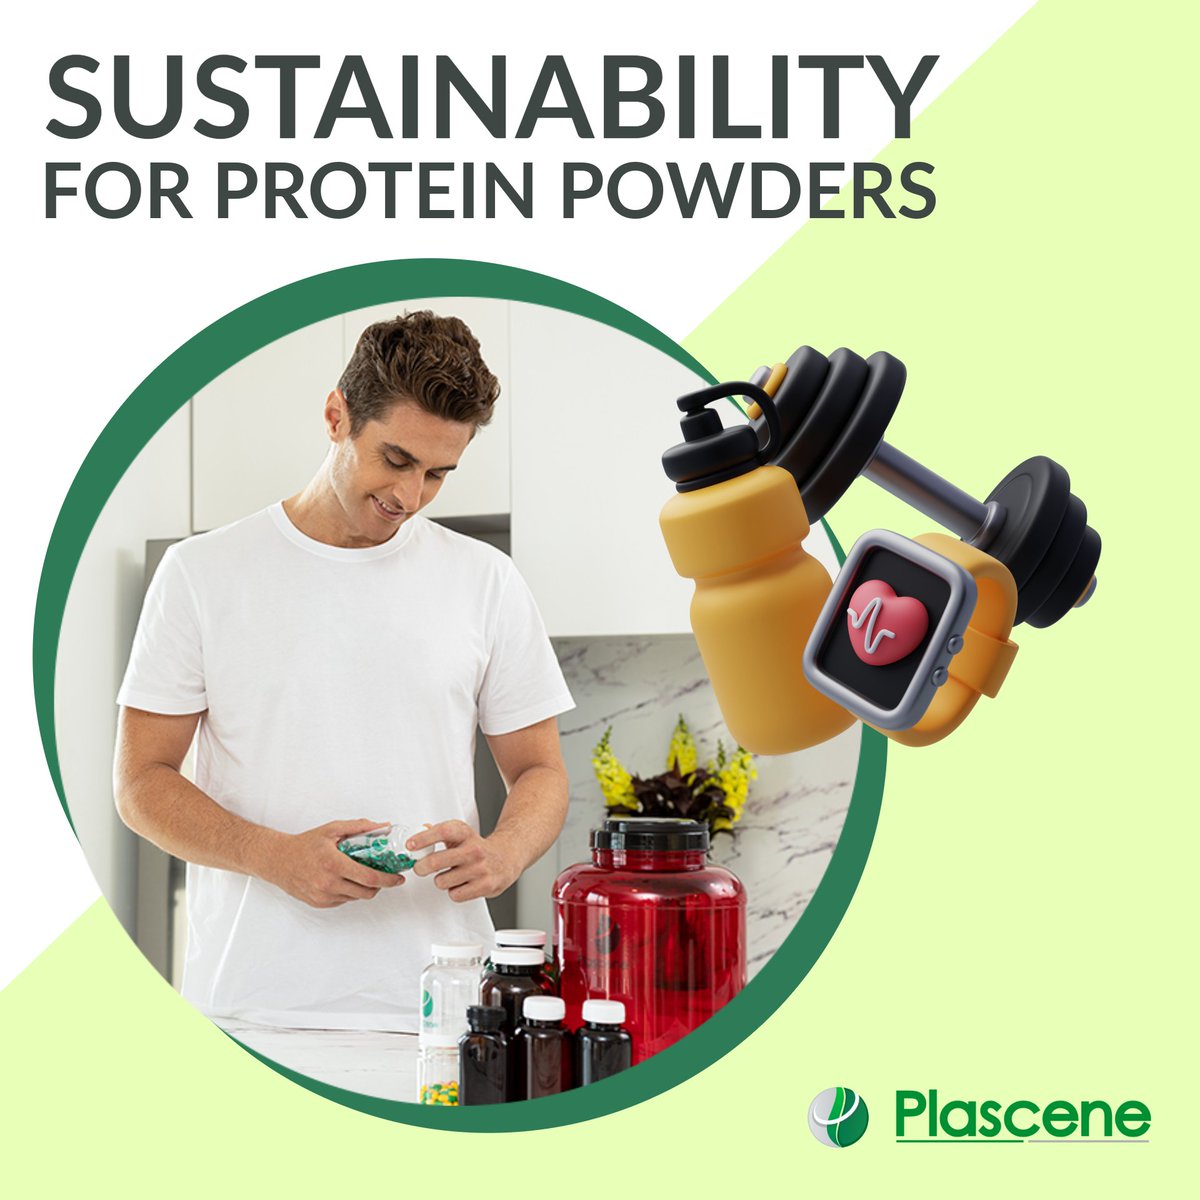 Powering Up Sustainability for Protein Powders 📷 #ProteinBrands #Sustainability #rPET plascene.com/powering-up-su…